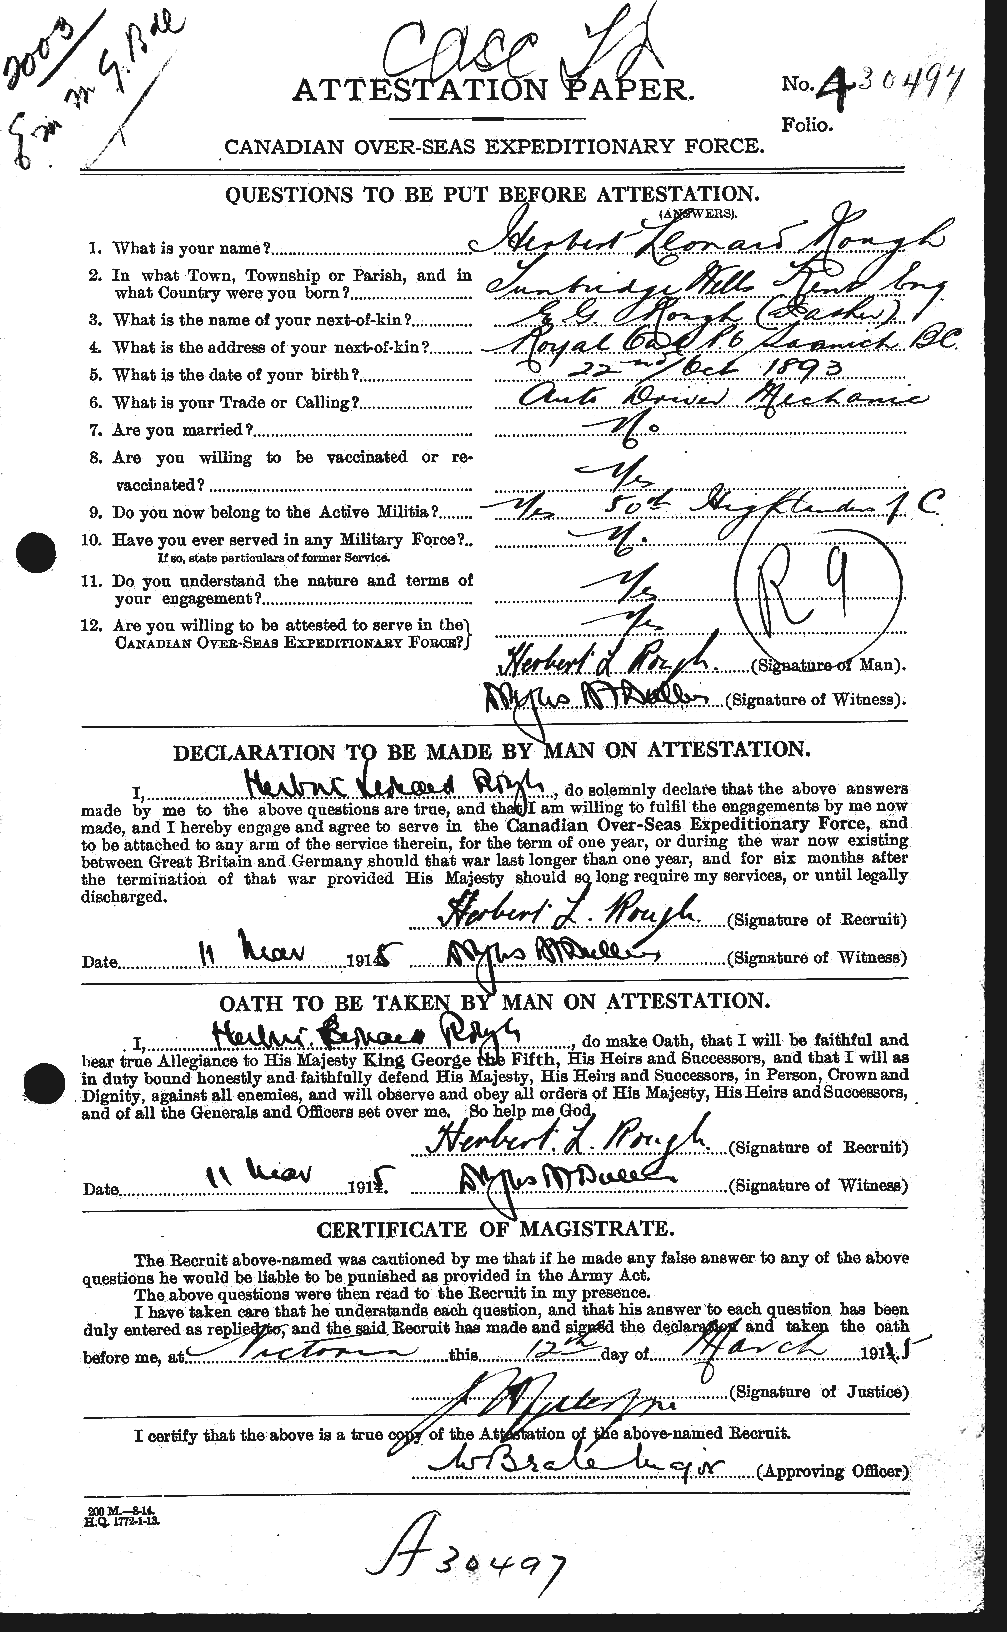 Personnel Records of the First World War - CEF 614529a